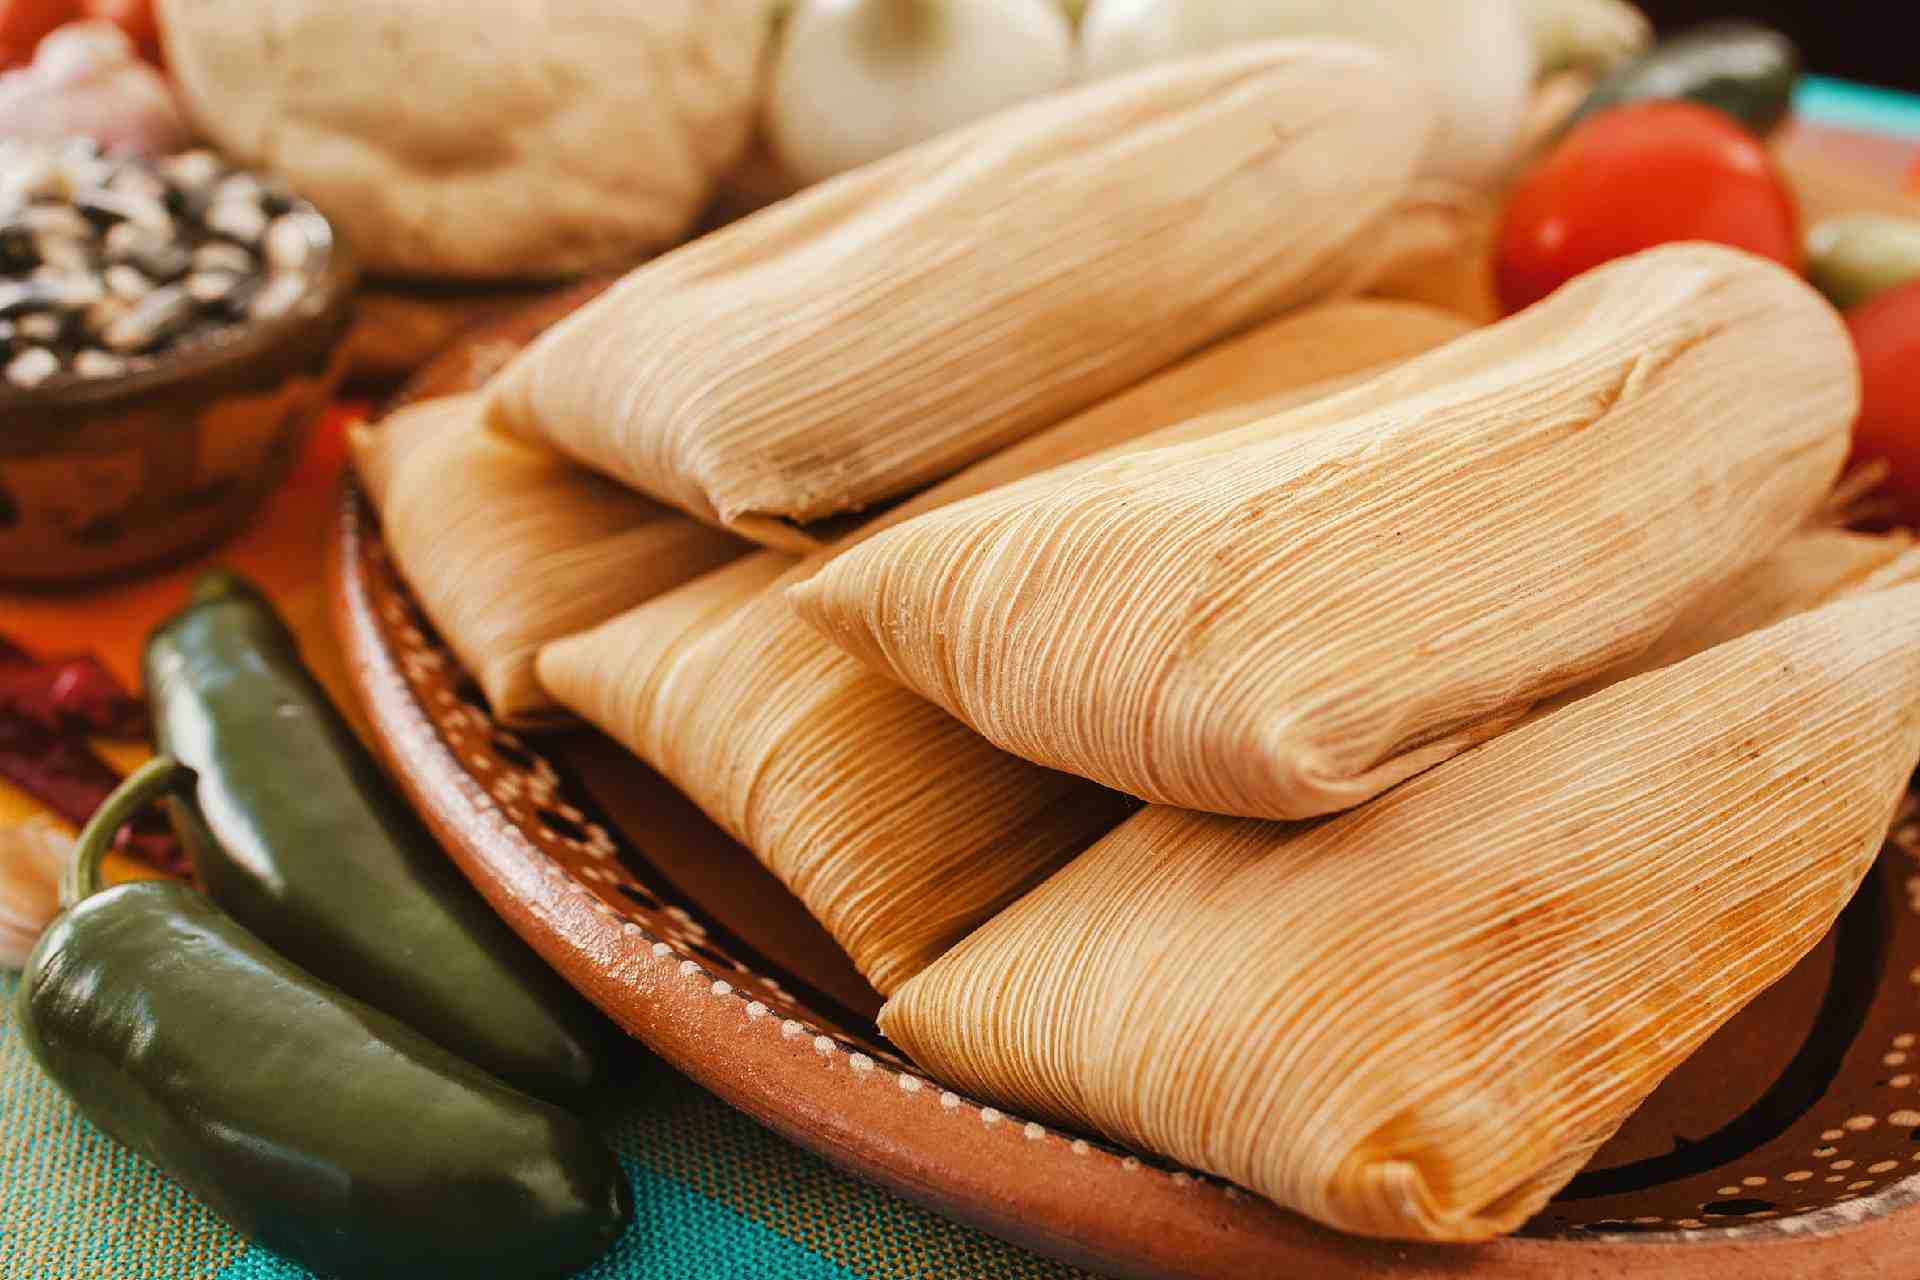 How Long Are Tamales Good For In The Refrigerator